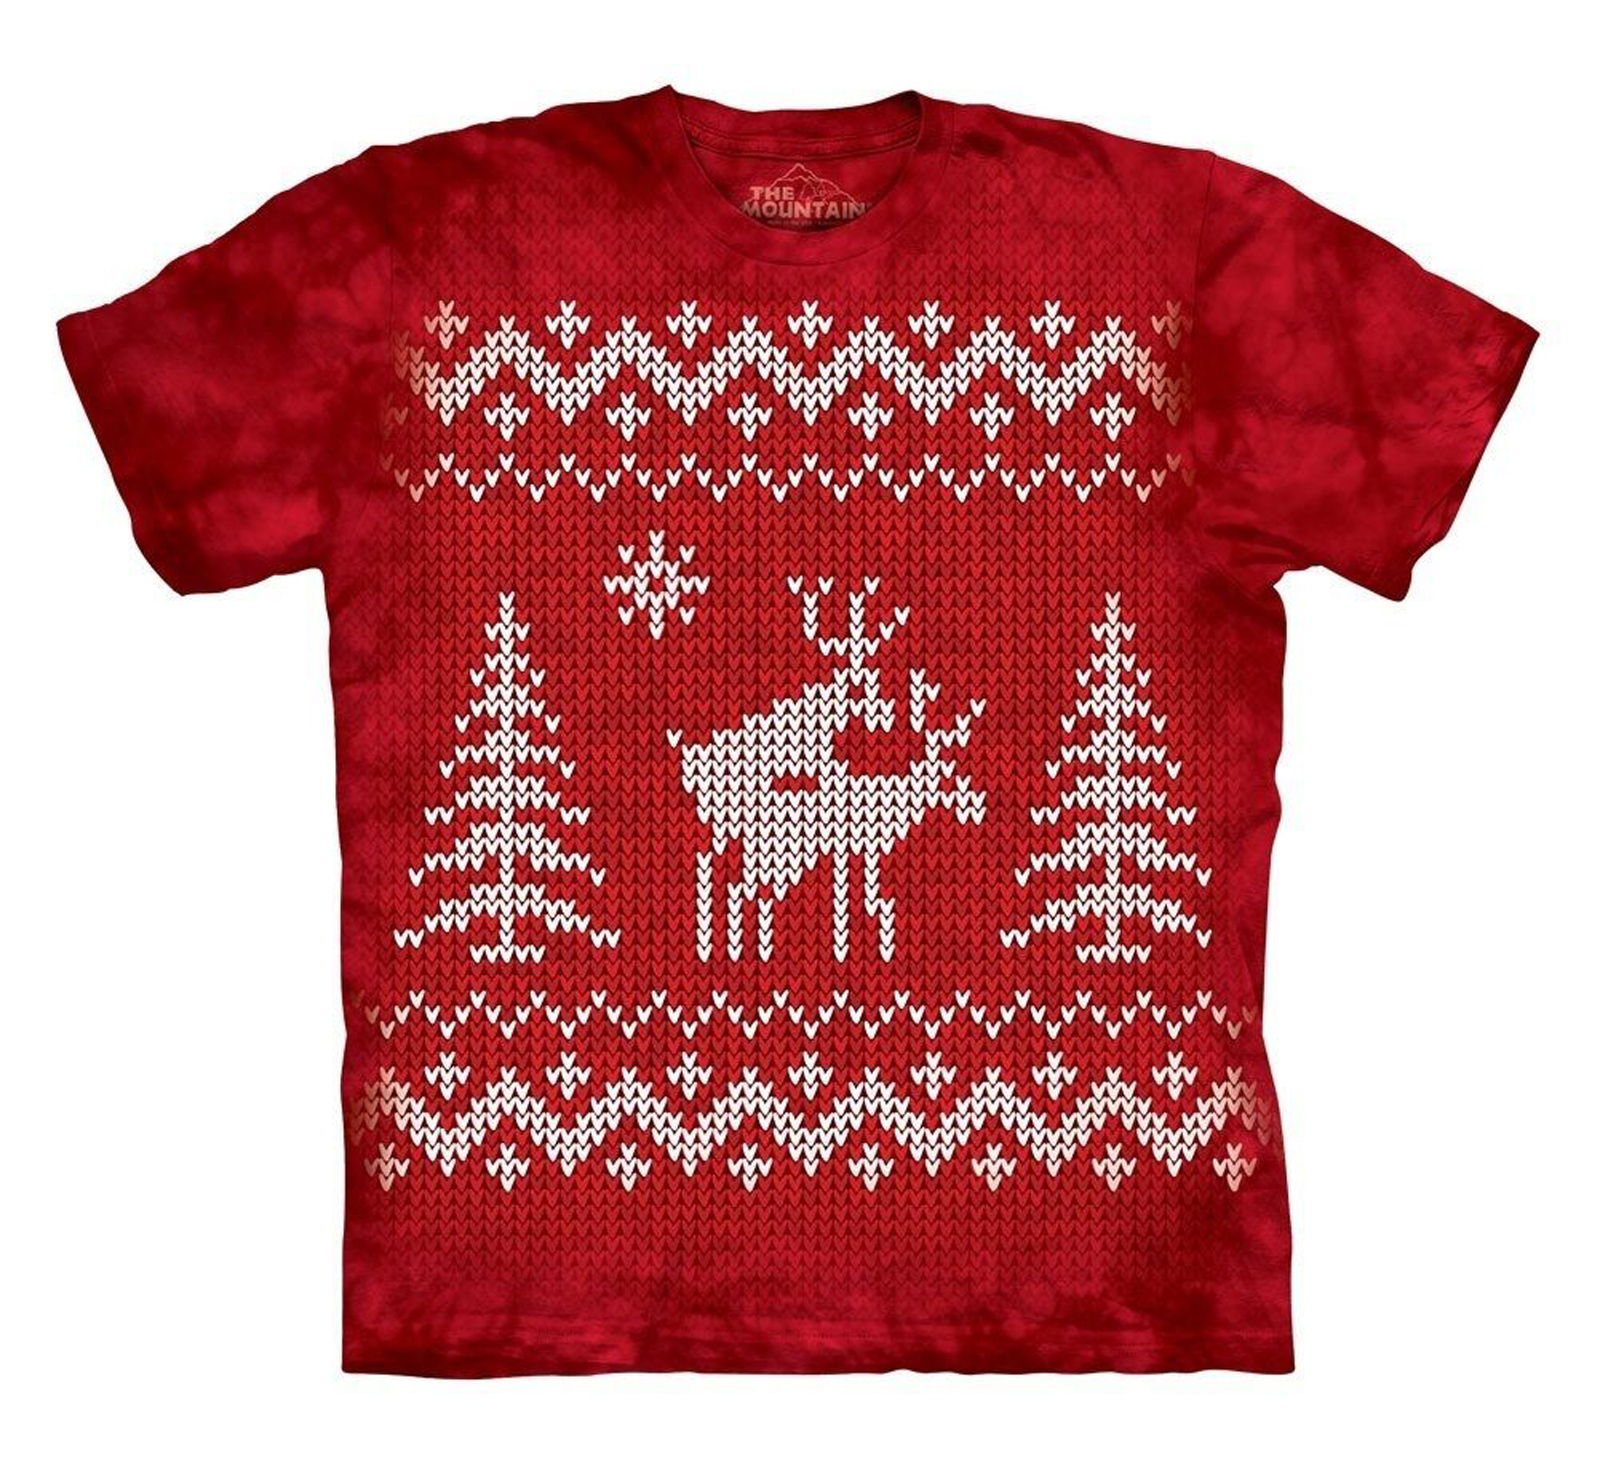 The Mountain Brand Reindeer Style Ugly Christmas Sweater CrossStitch T ...